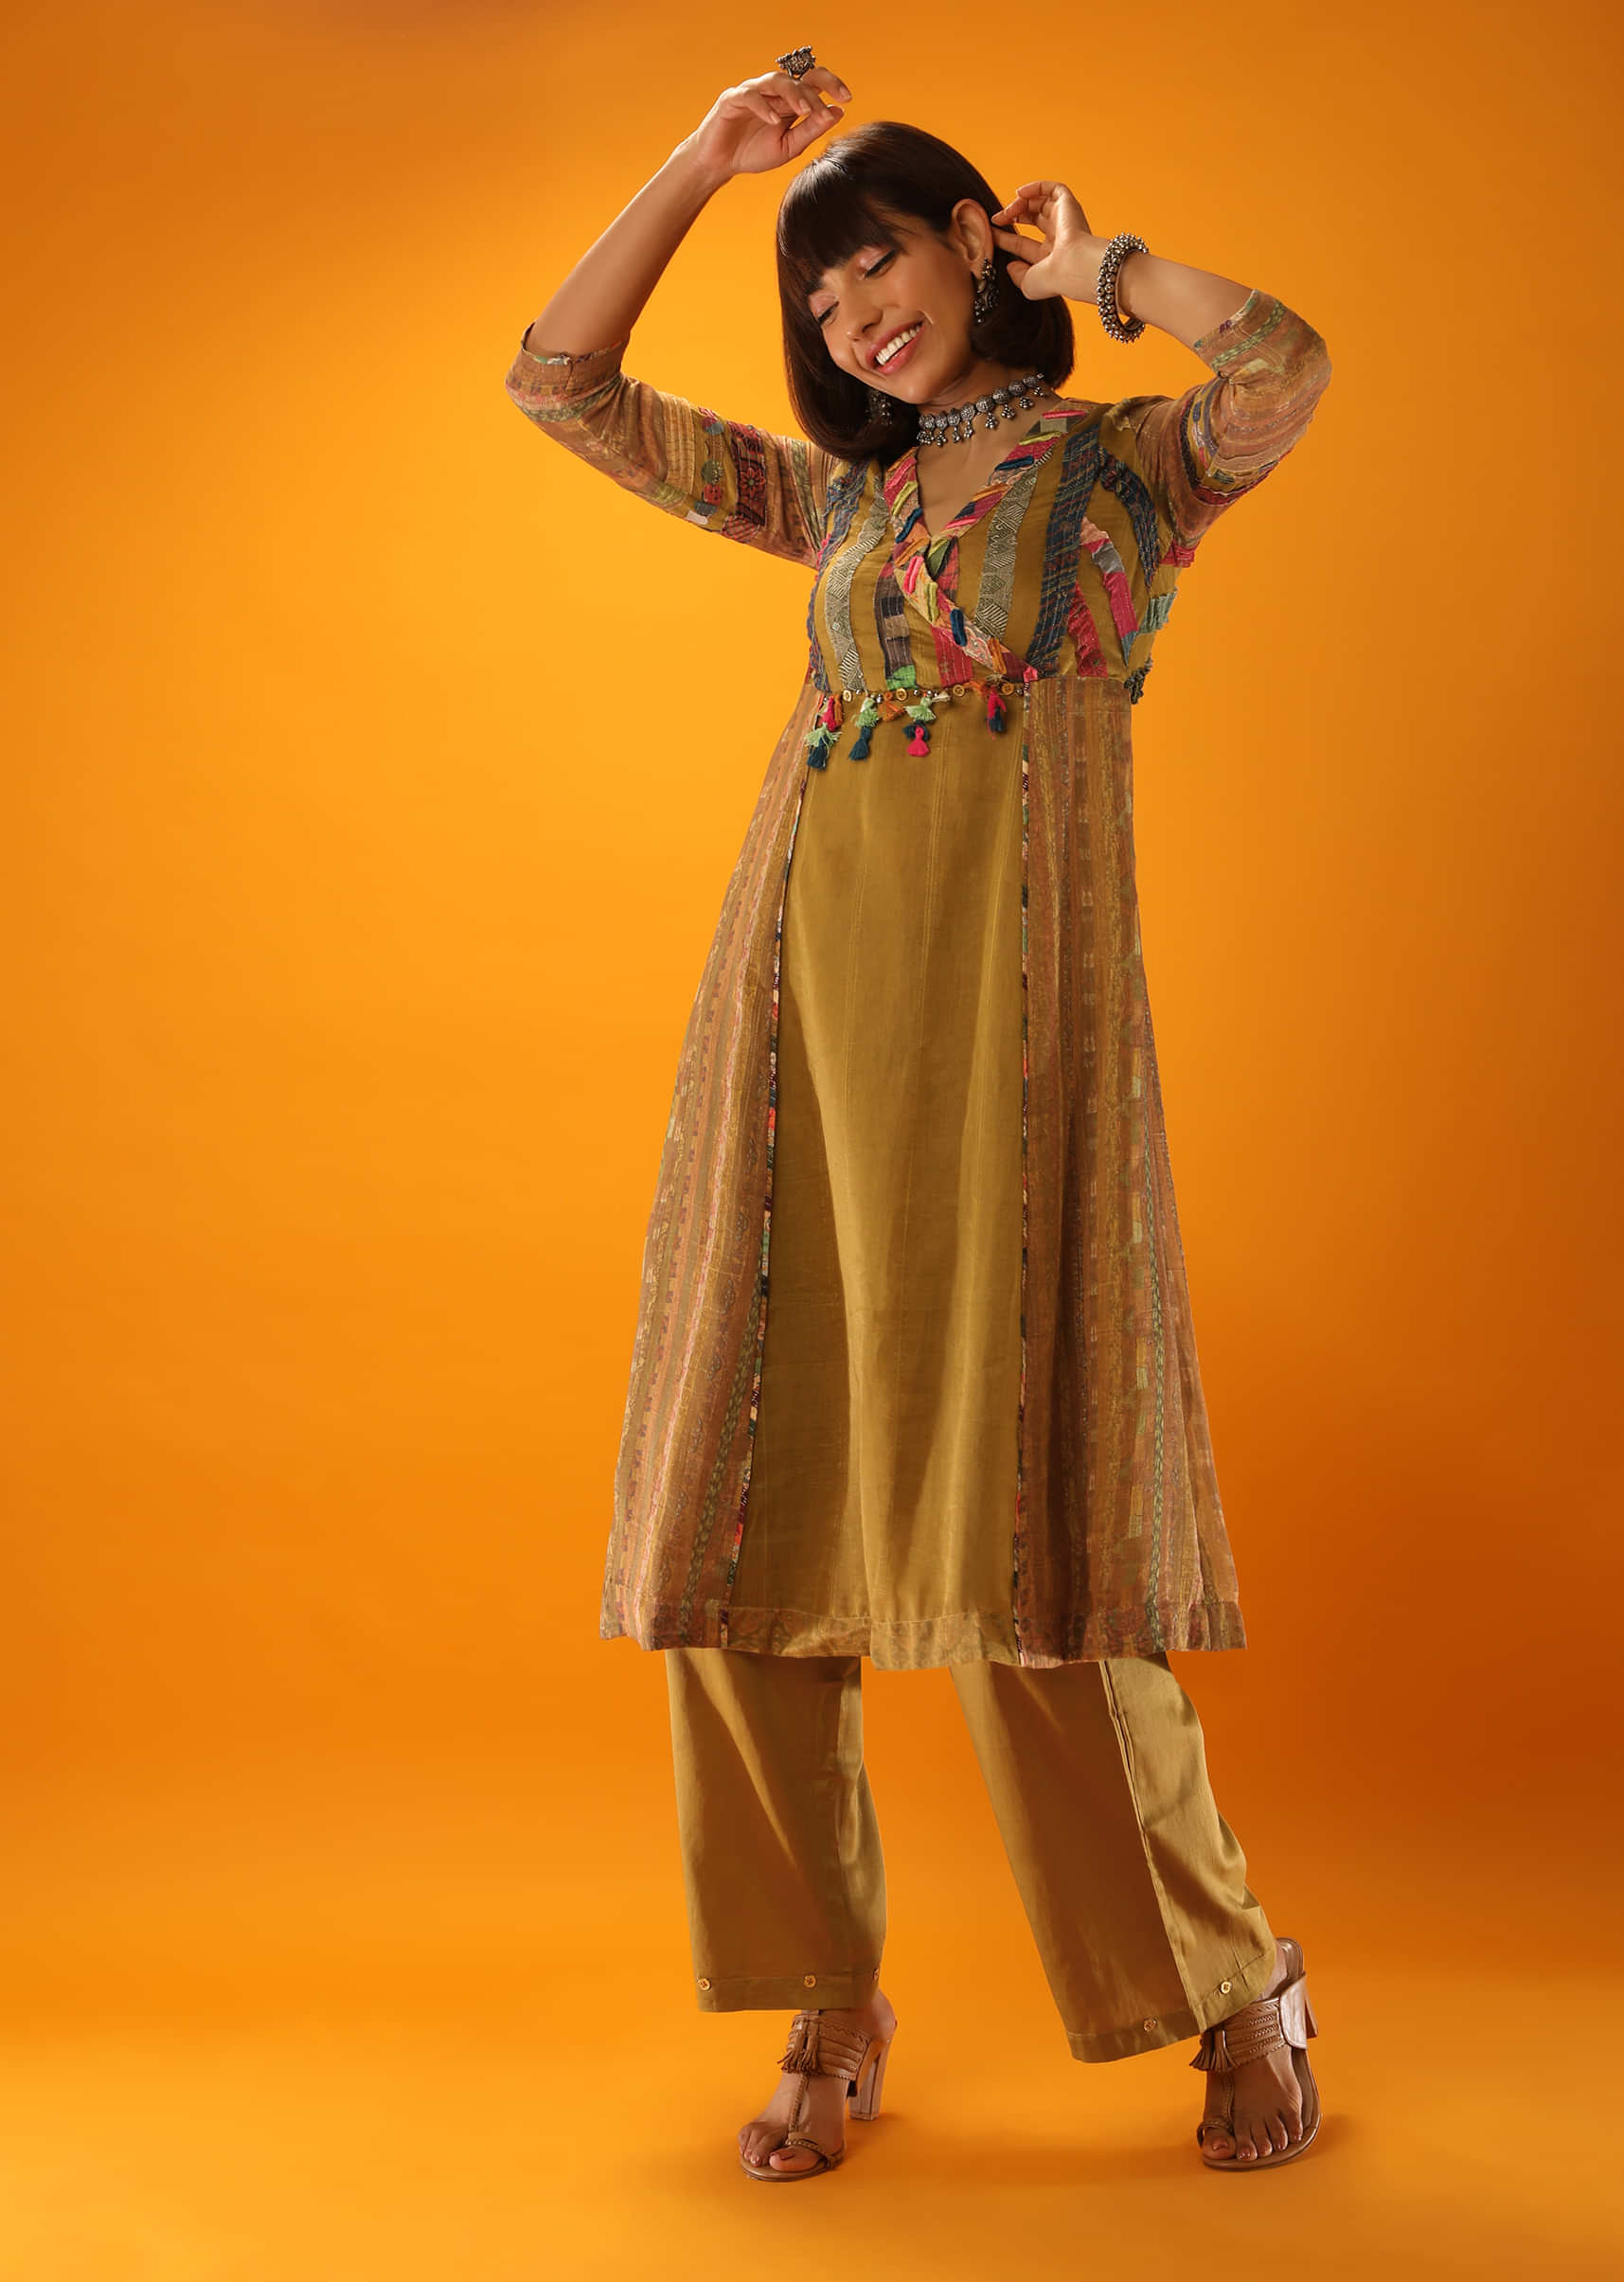 Ochre A Line Kurta And Palazzo Pants Set With Appliqued Stripes In Multi Colored Printed Fabric  